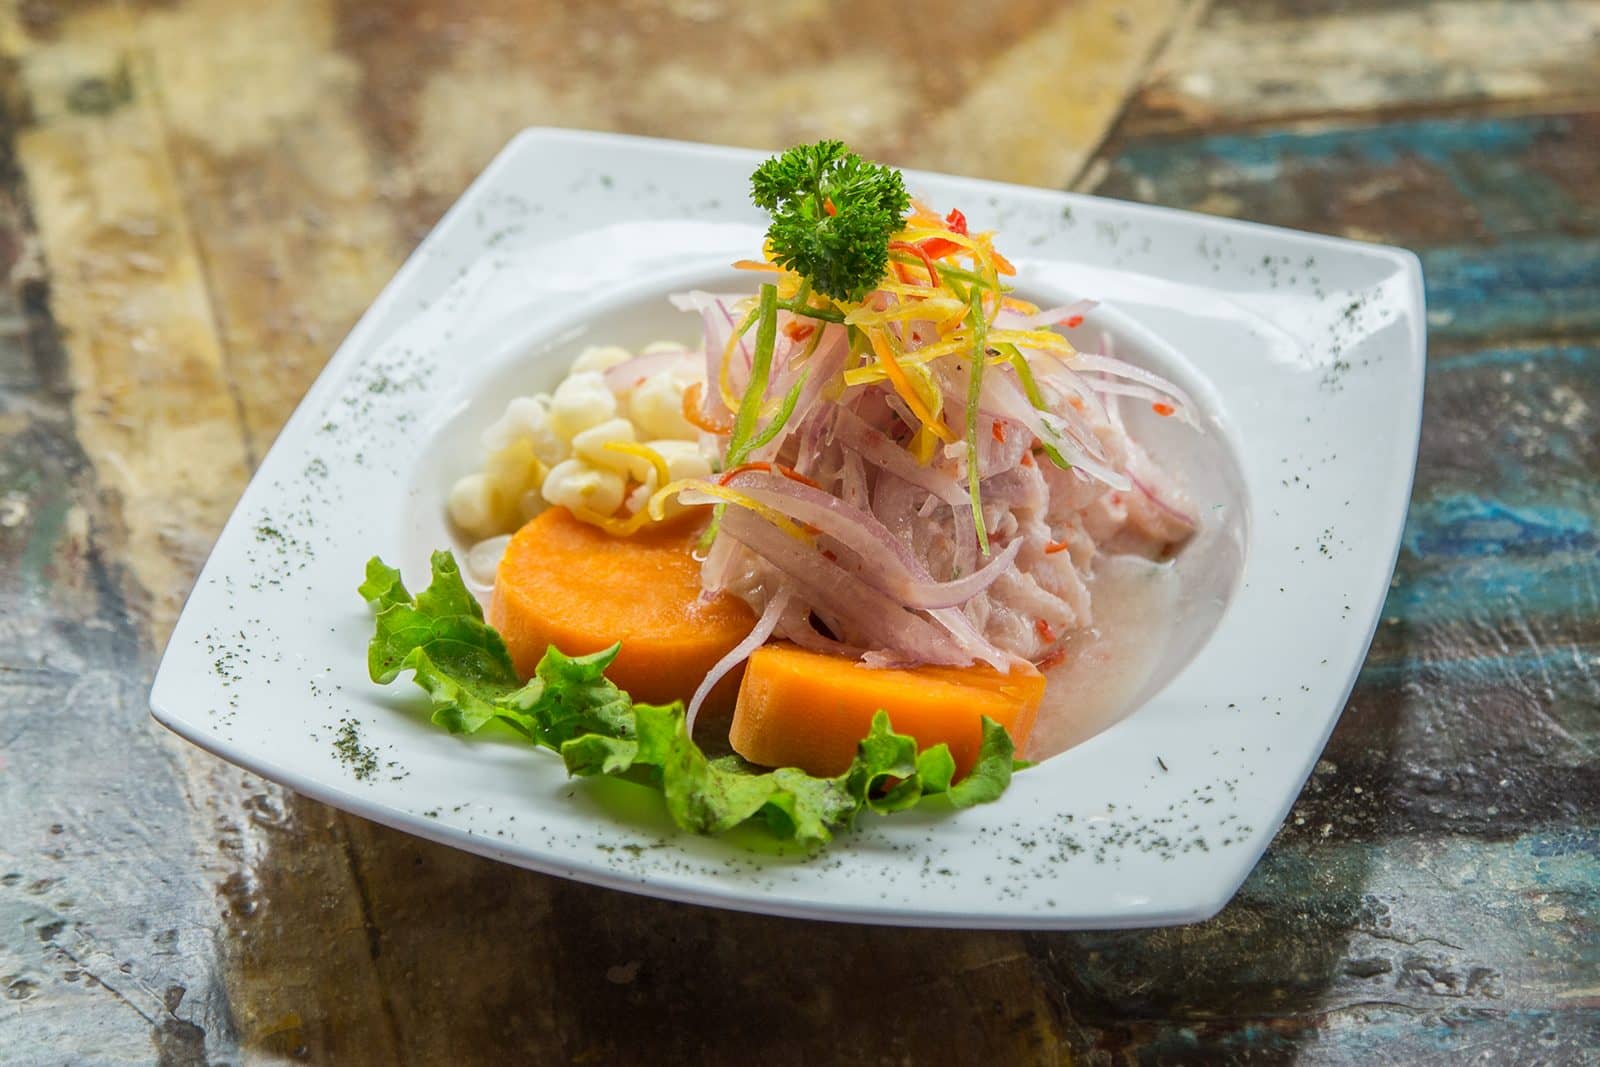 Ceviche prepared with sweet potatoes and vegetables